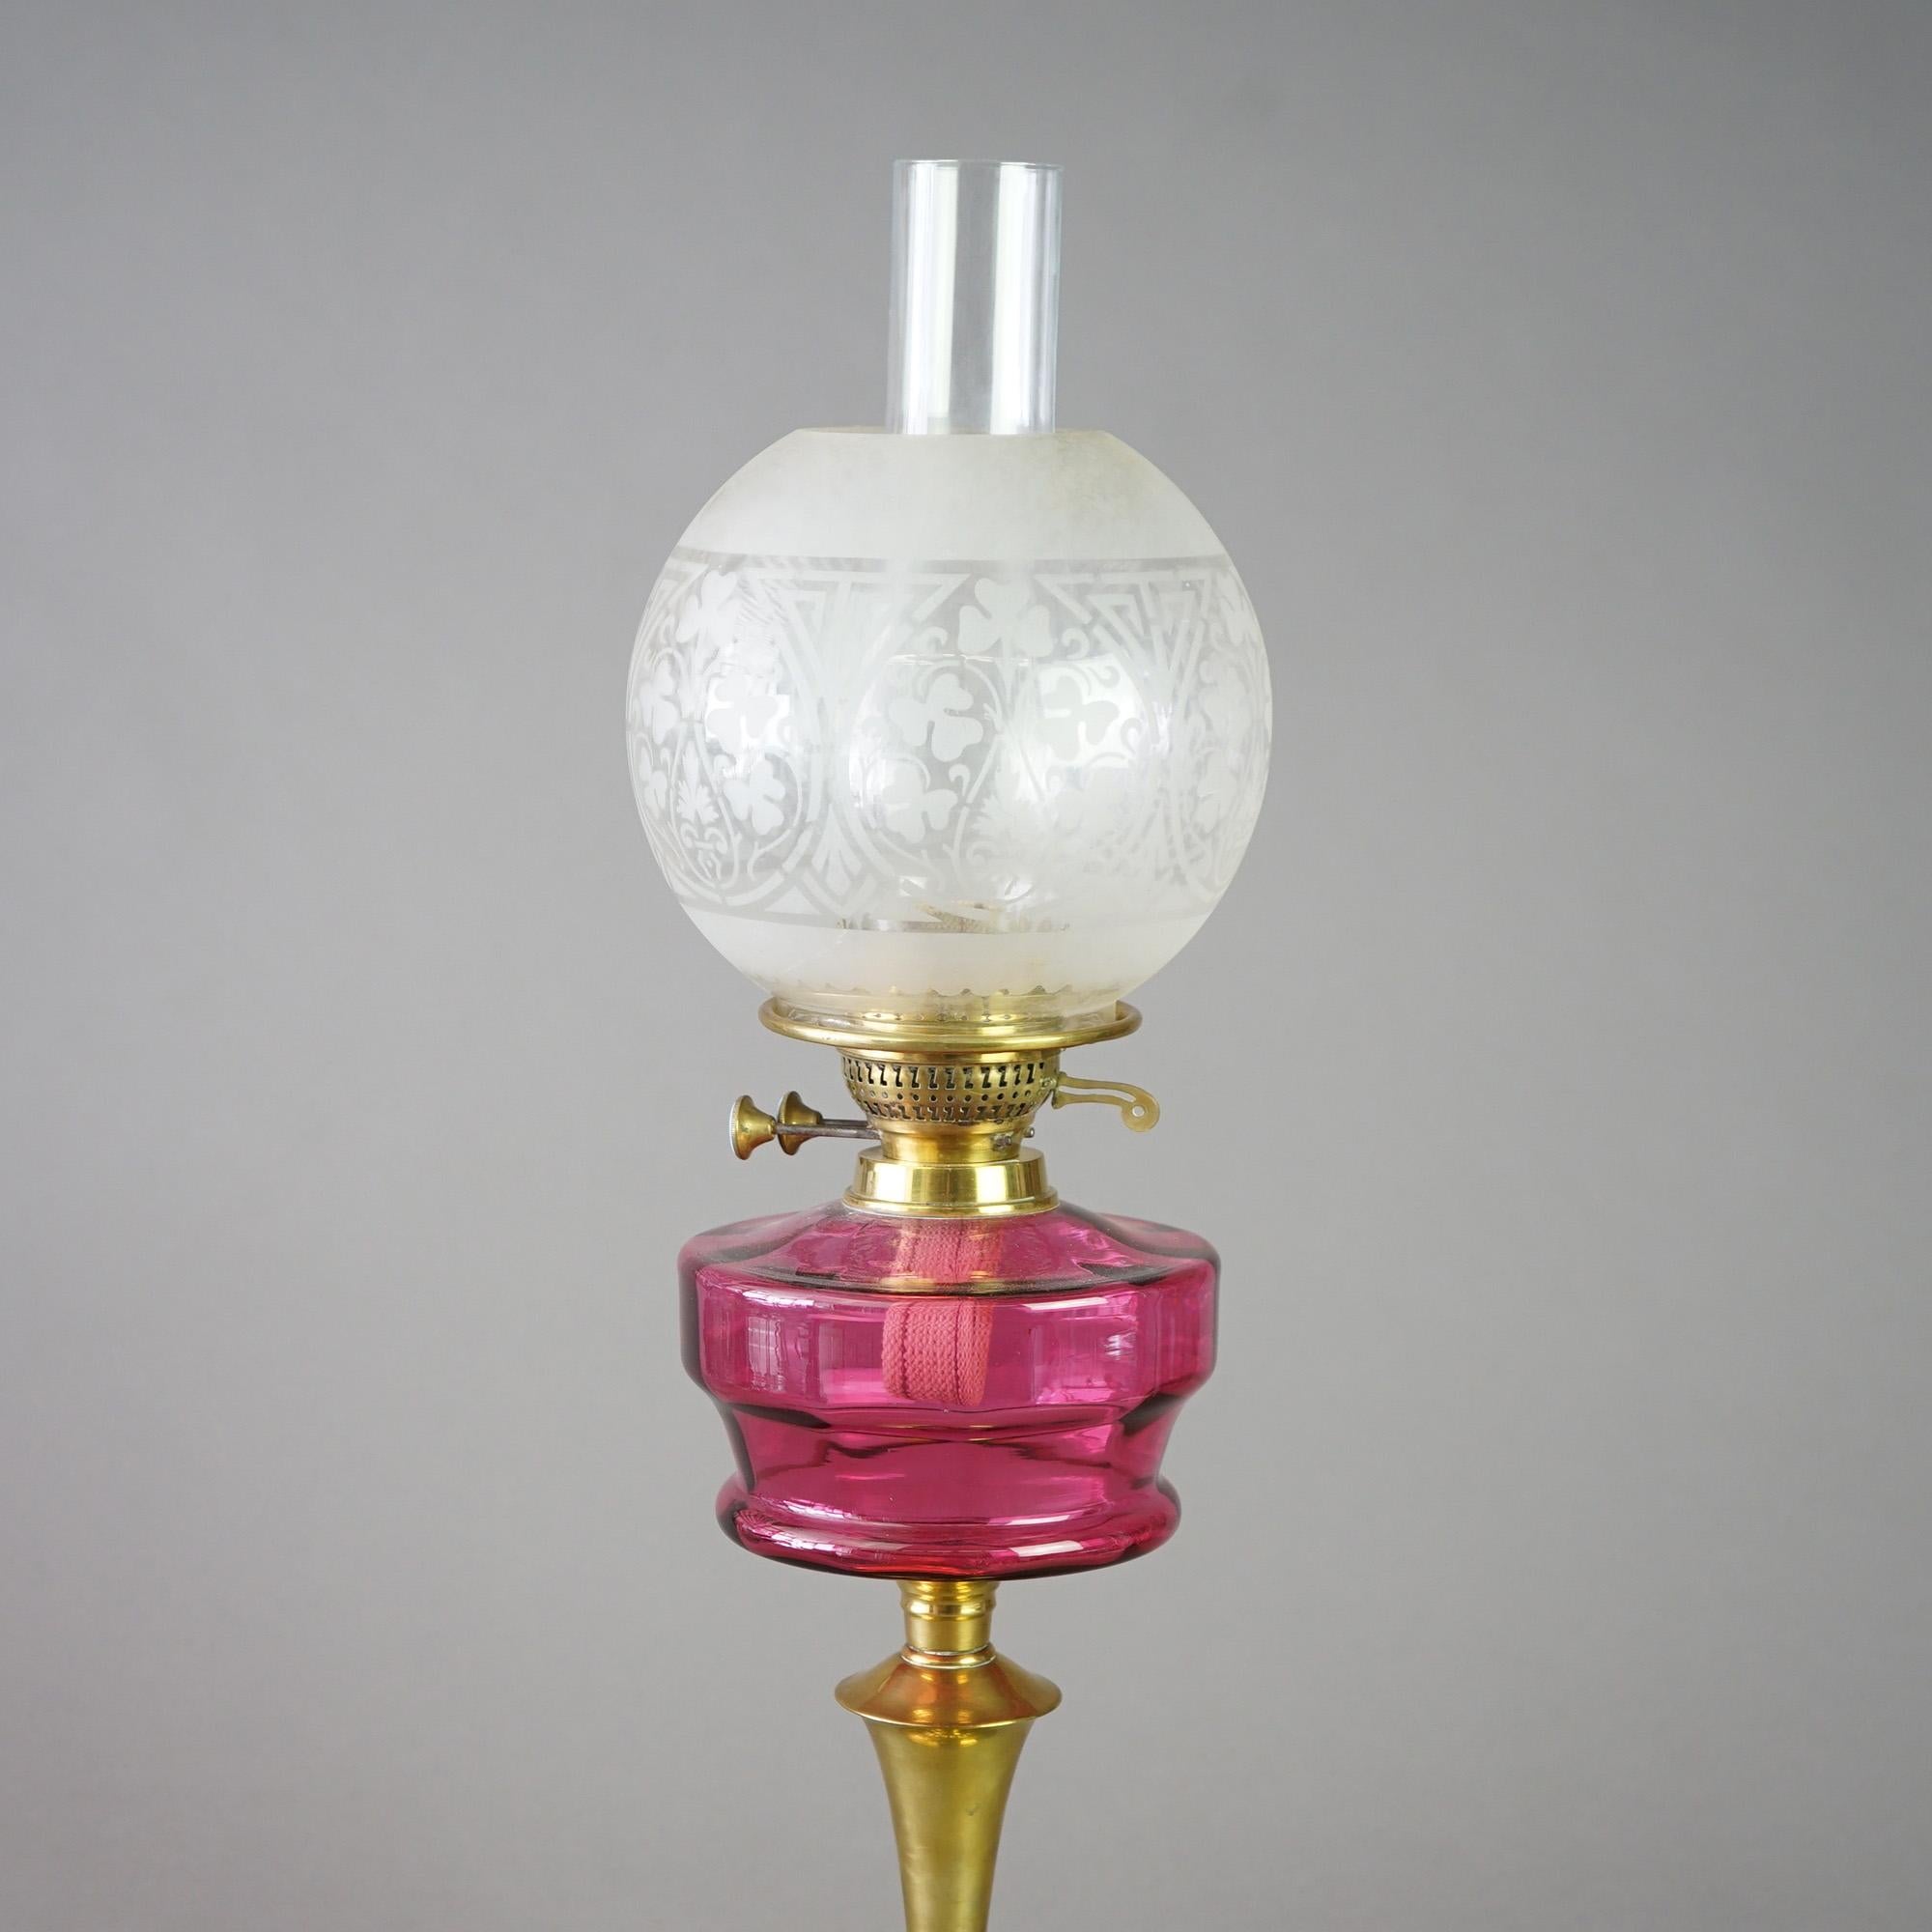 Antique Brass and Cranberry Glass “Gone With The Wind” Oil Lamp with Etched Glass Shade, Young's, C1890

Measures- 25.5''H x 7''W x 7''D